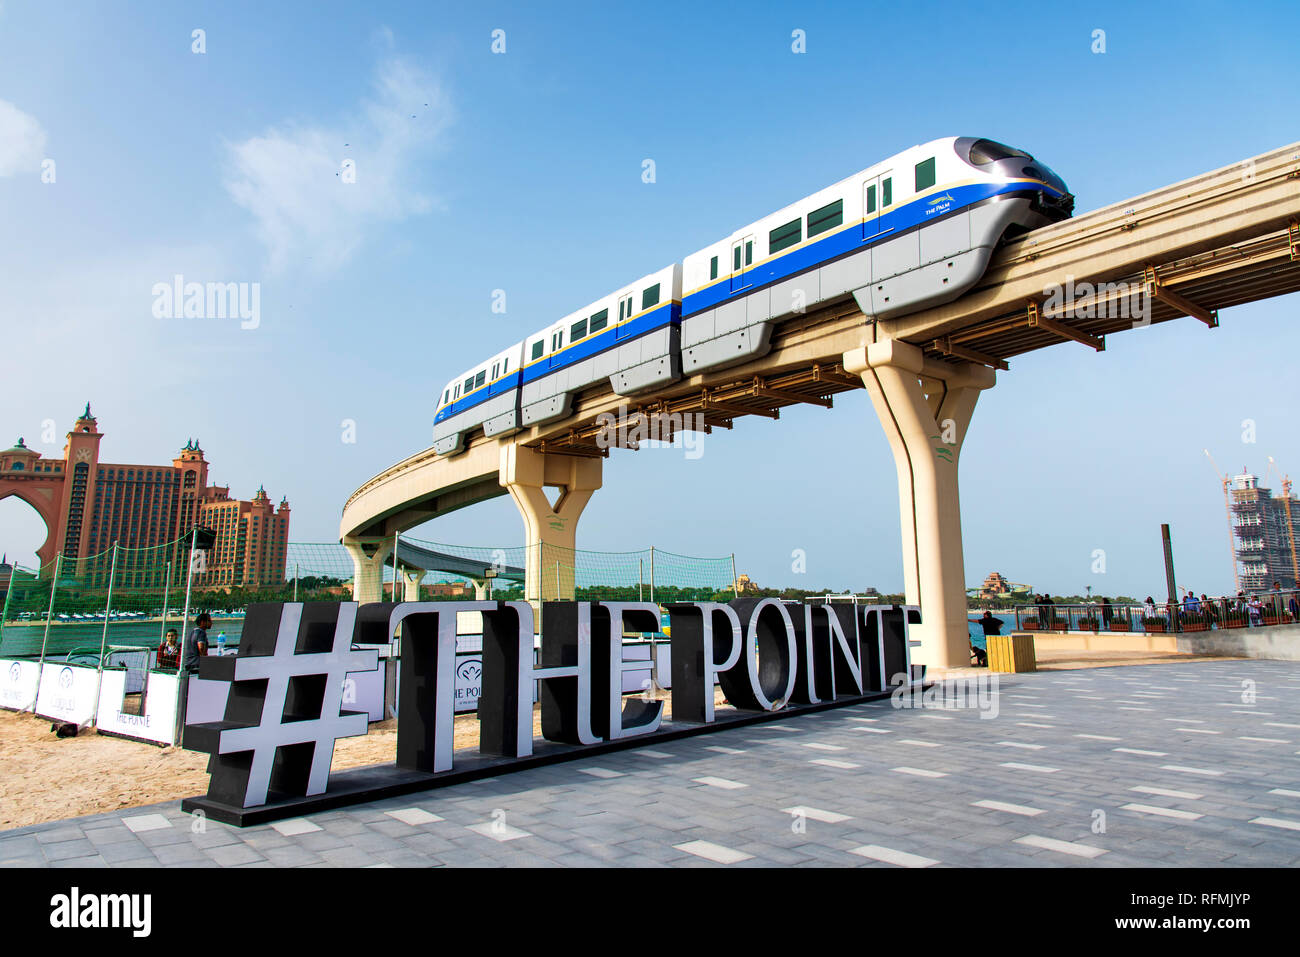 Dubai, United Arab Emirates - January 25, 2019: Train running above The Pointe waterfront dining and entertainment destination newly opened at the Pal Stock Photo